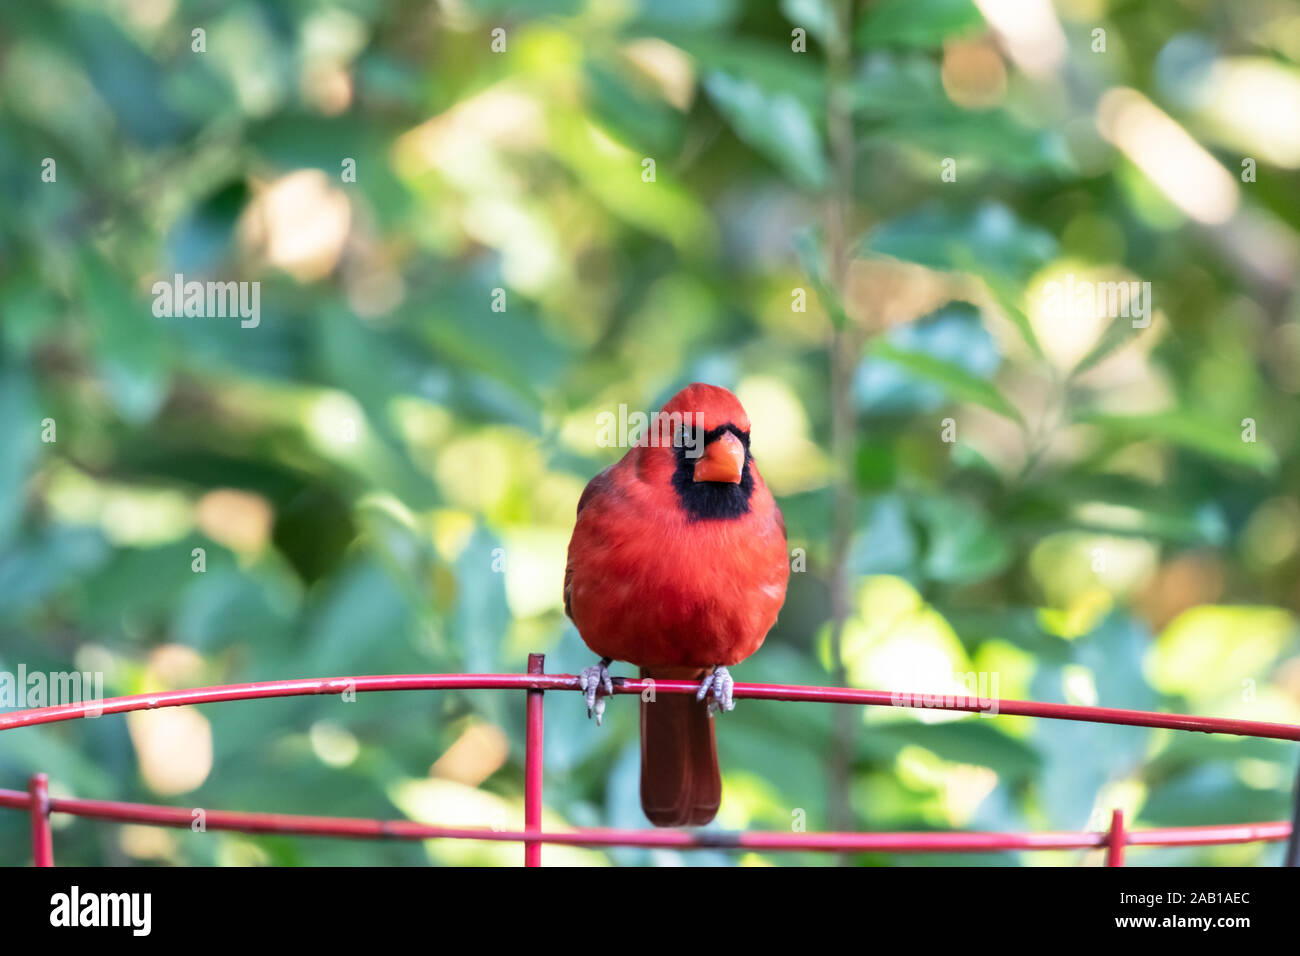 A male Northern Cardinal perched on a wire garden plant frame in Florida. Cardinals are songbirds which do not migrate, but stay year round. Stock Photo